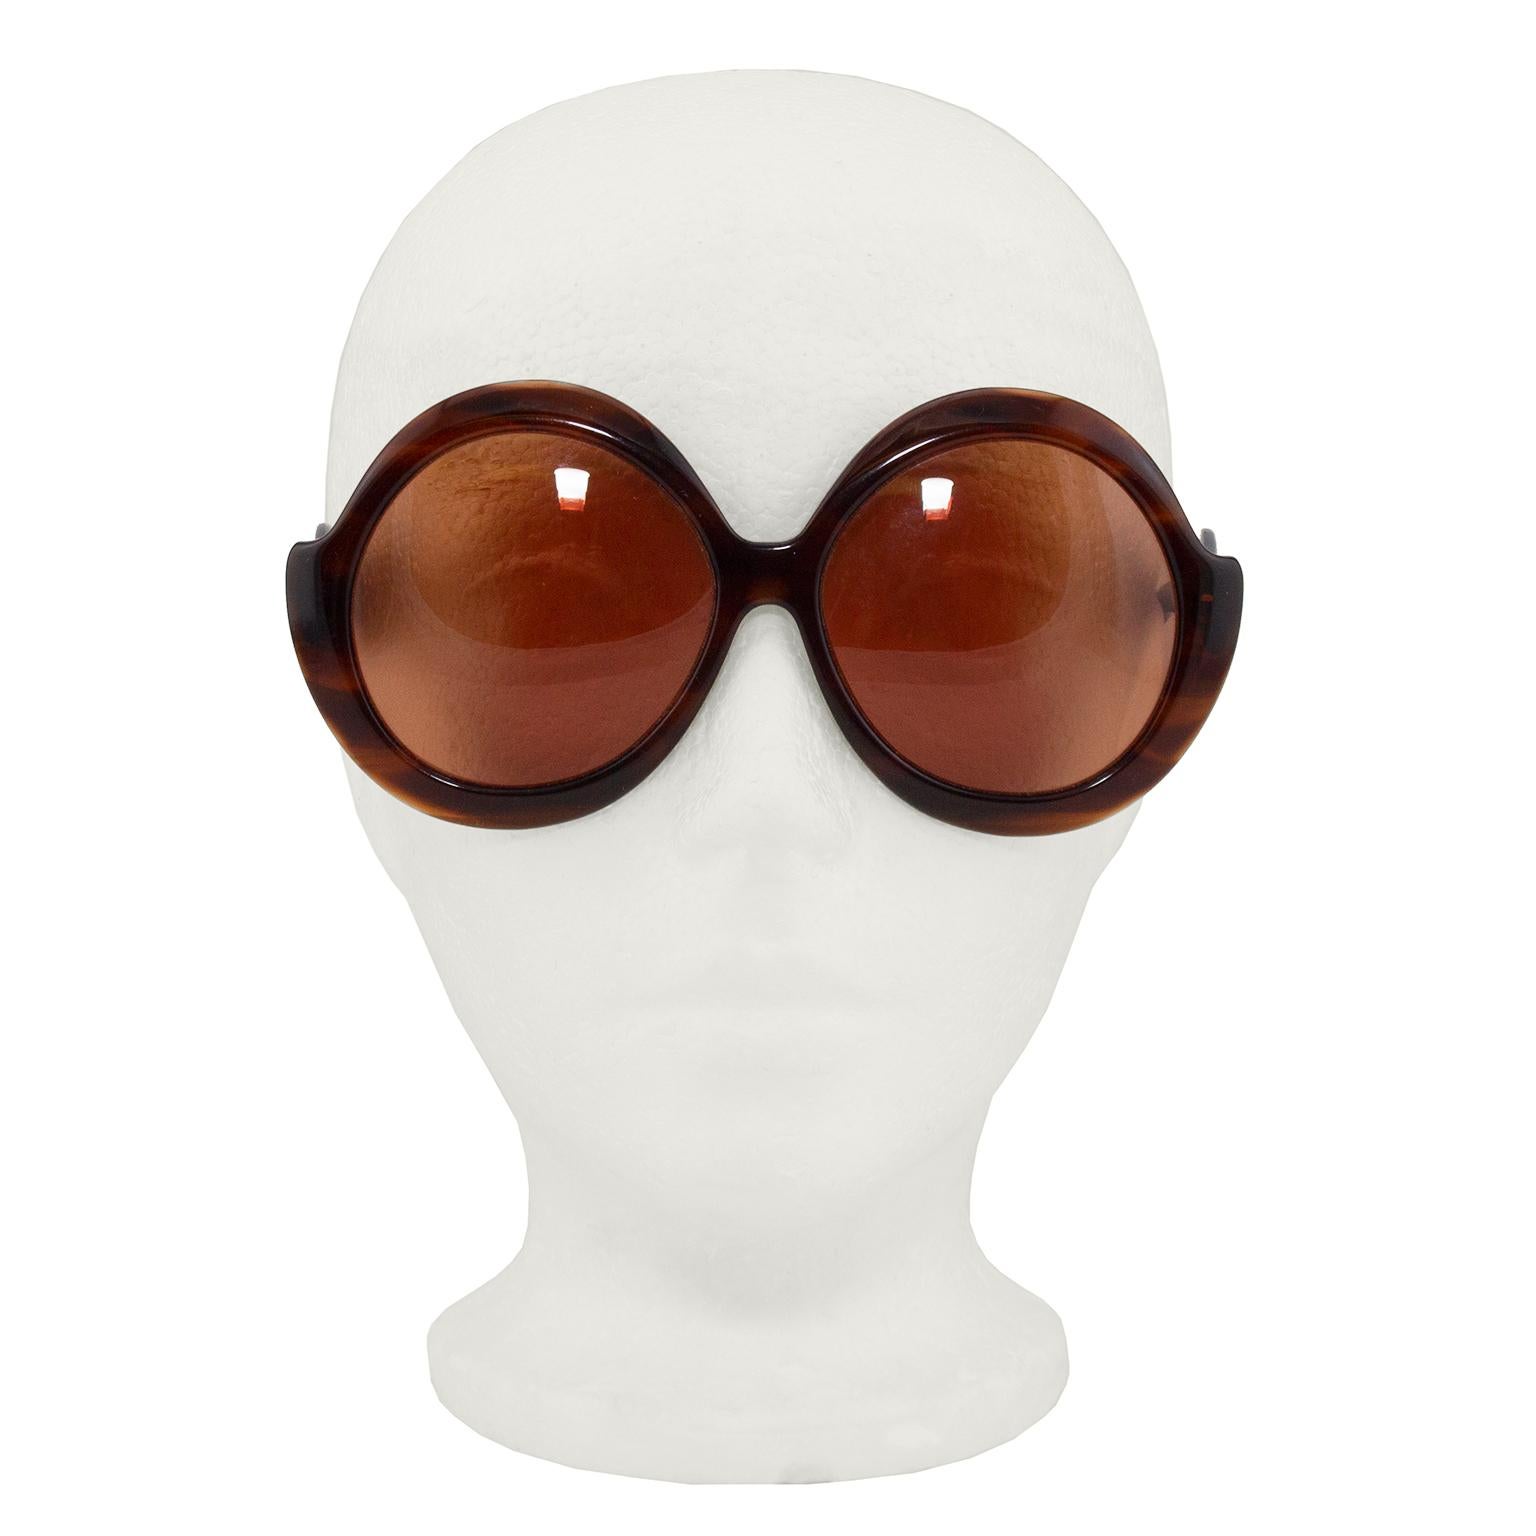 Mod and fun tortoise shell sunglasses from the 1960s, made by Ultra Designs by Brandy. Called the 